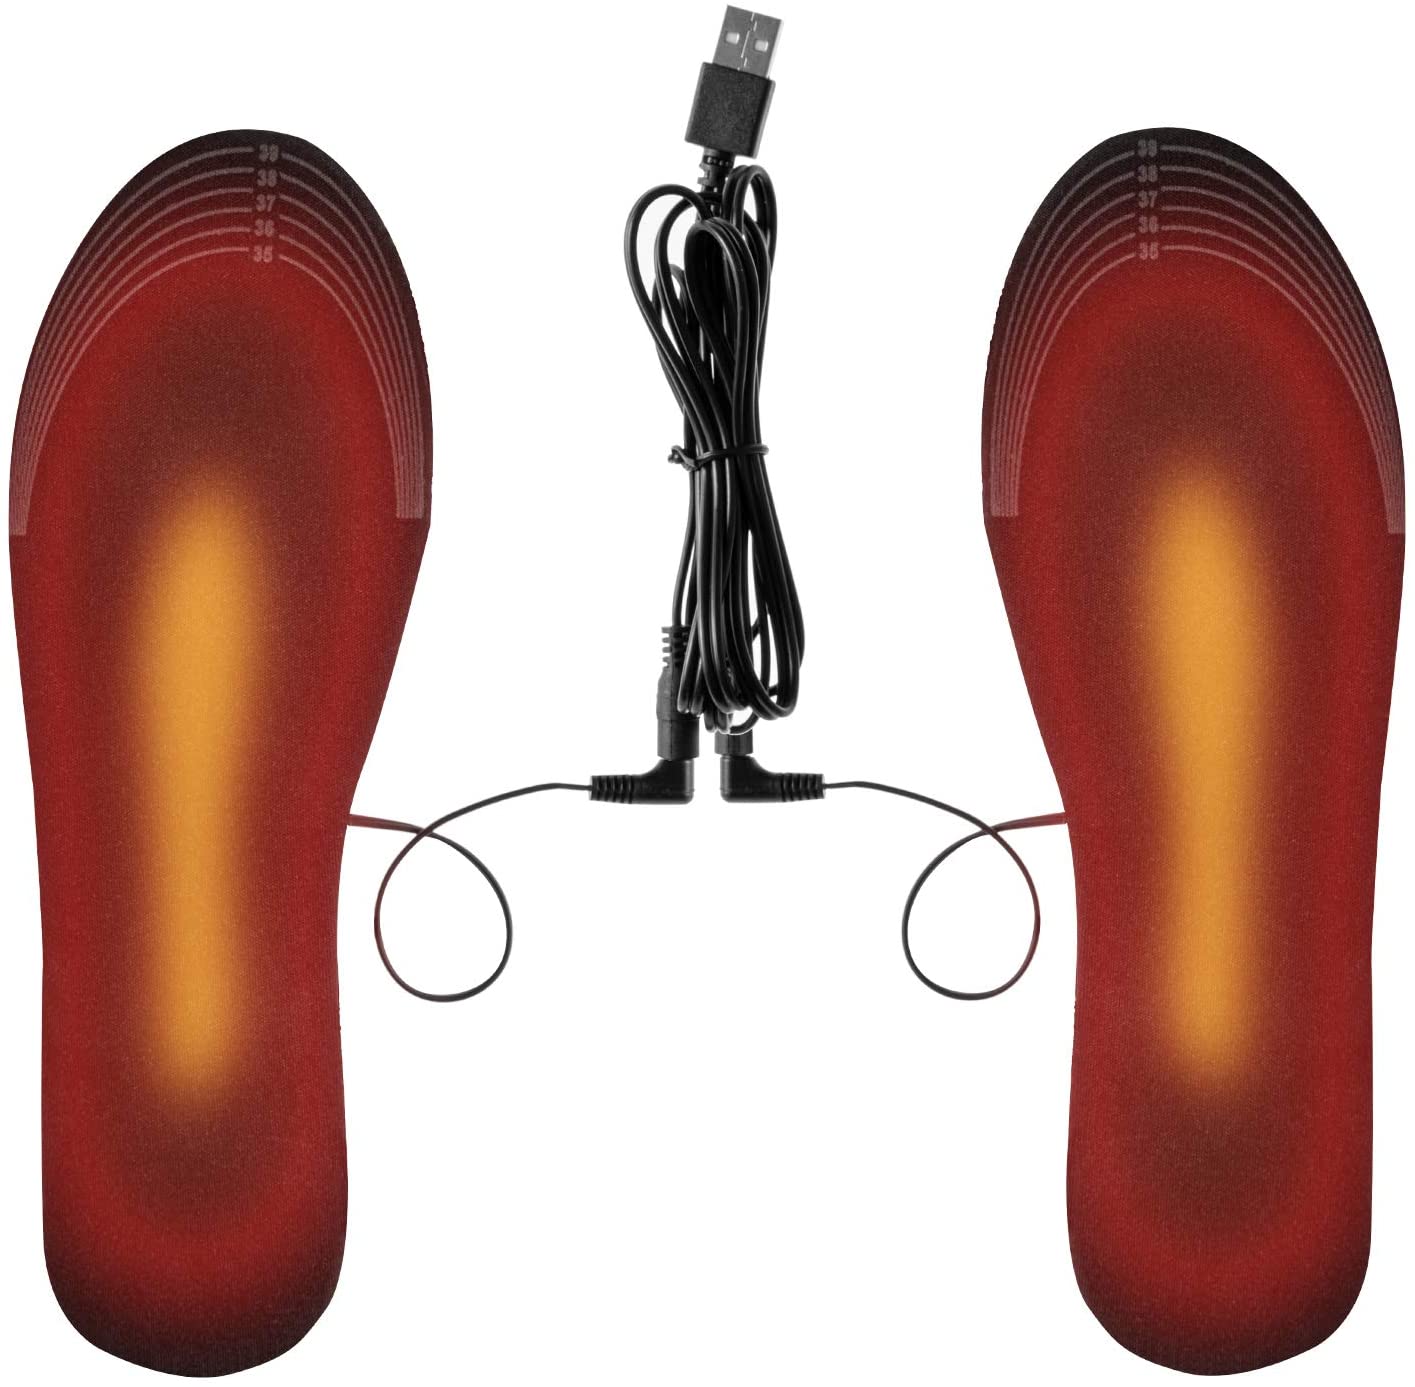 Heated Insoles for Men and Women, Ferfil Electric Heated Sole Inserts with Trimable Size to Compatible Most Foot Shoes for Skiing Hunting Hiking Camping Outdoor Sports Size: US 5-8.5 - Home Decor Gifts and More